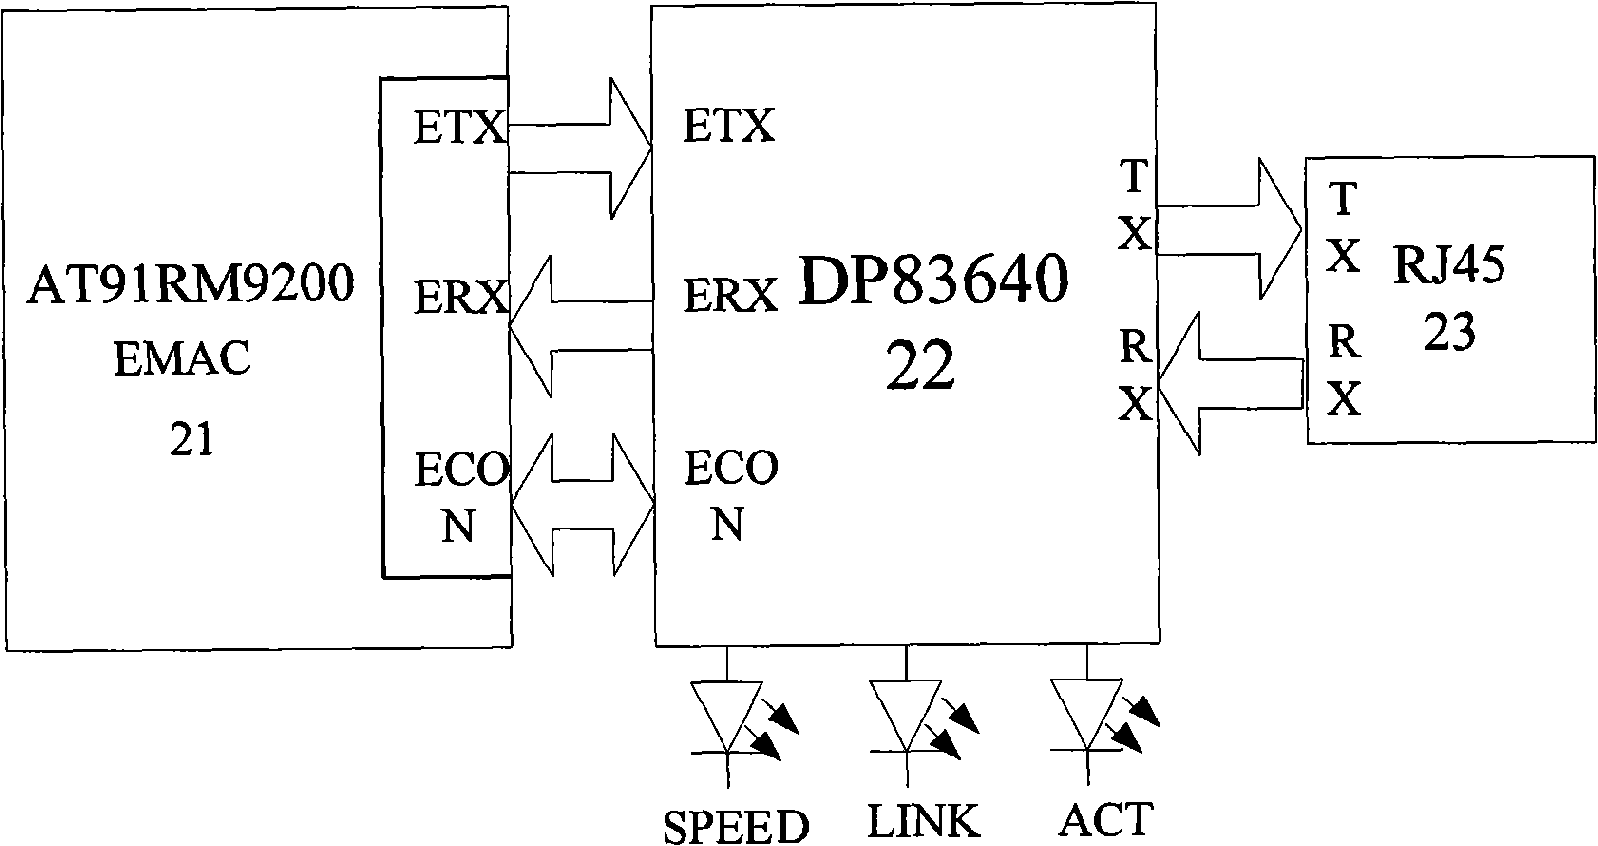 Time setting device for digital substation